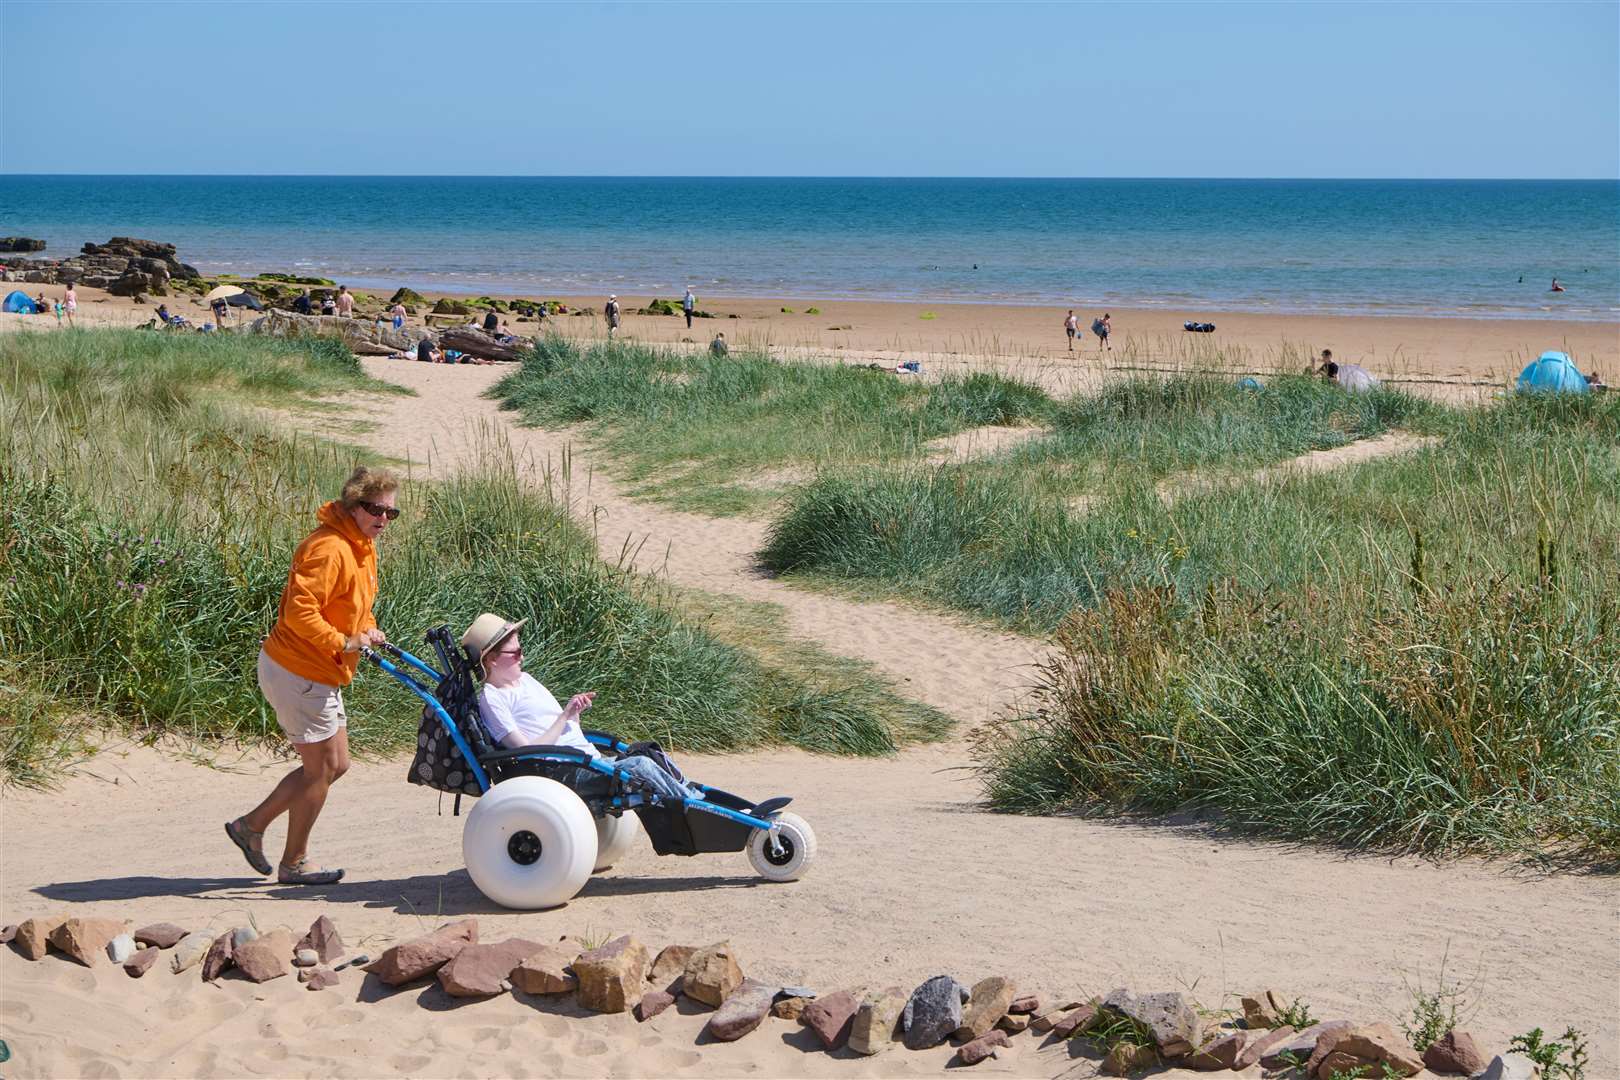 Beautiful Dornoch beach has a special wheelchair service that enables people with disabilities to access the sands.